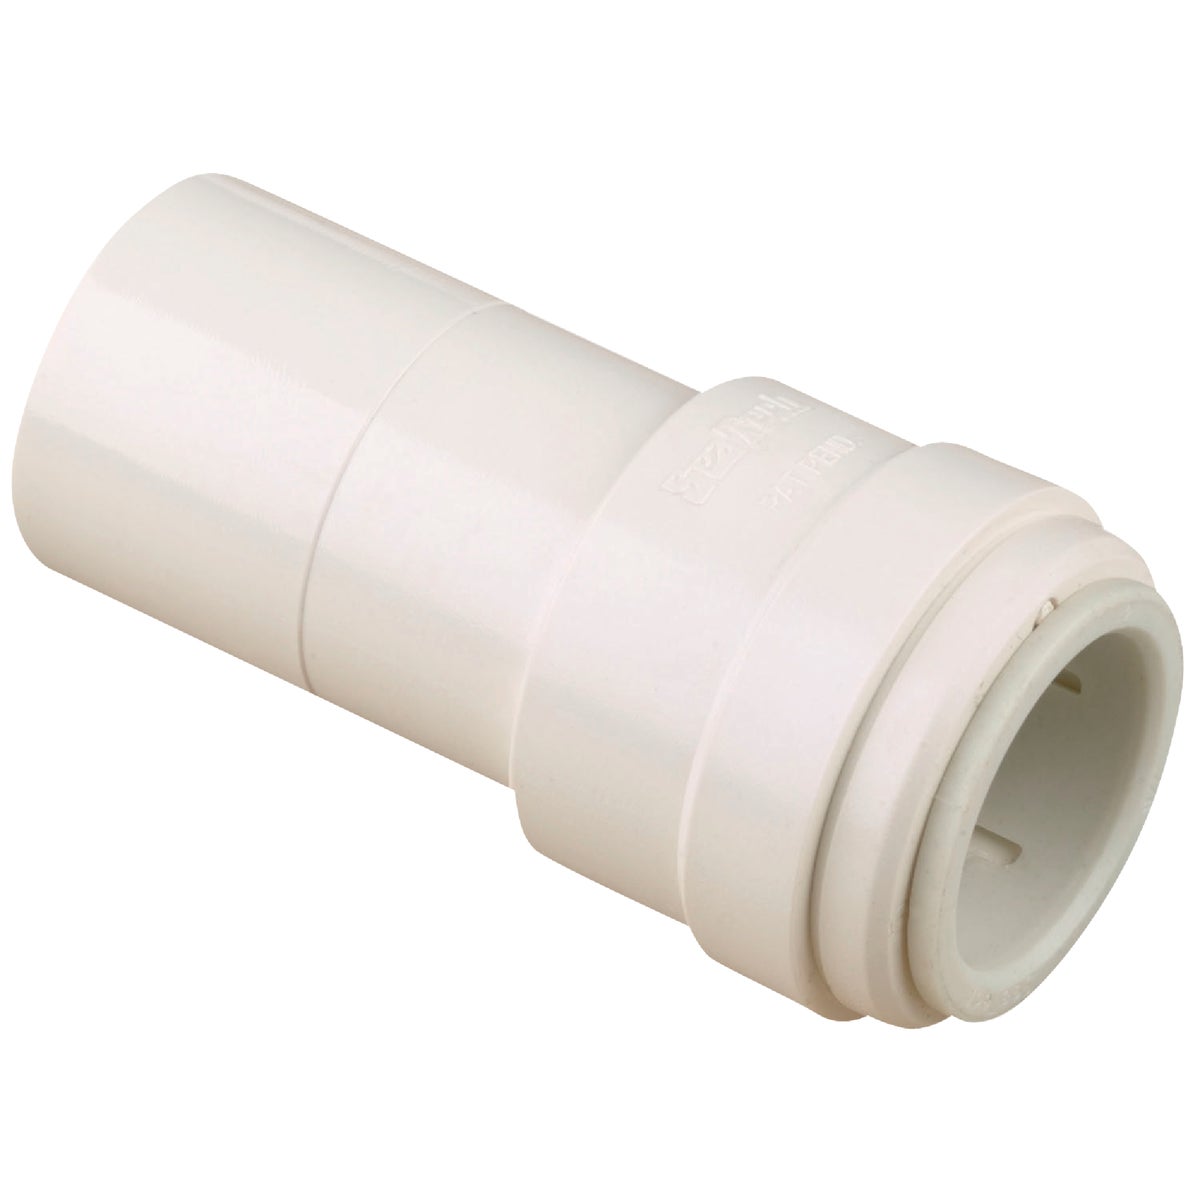 Item 447109, CTS quick connect stackable (stem x quick connect) coupling (push type) for